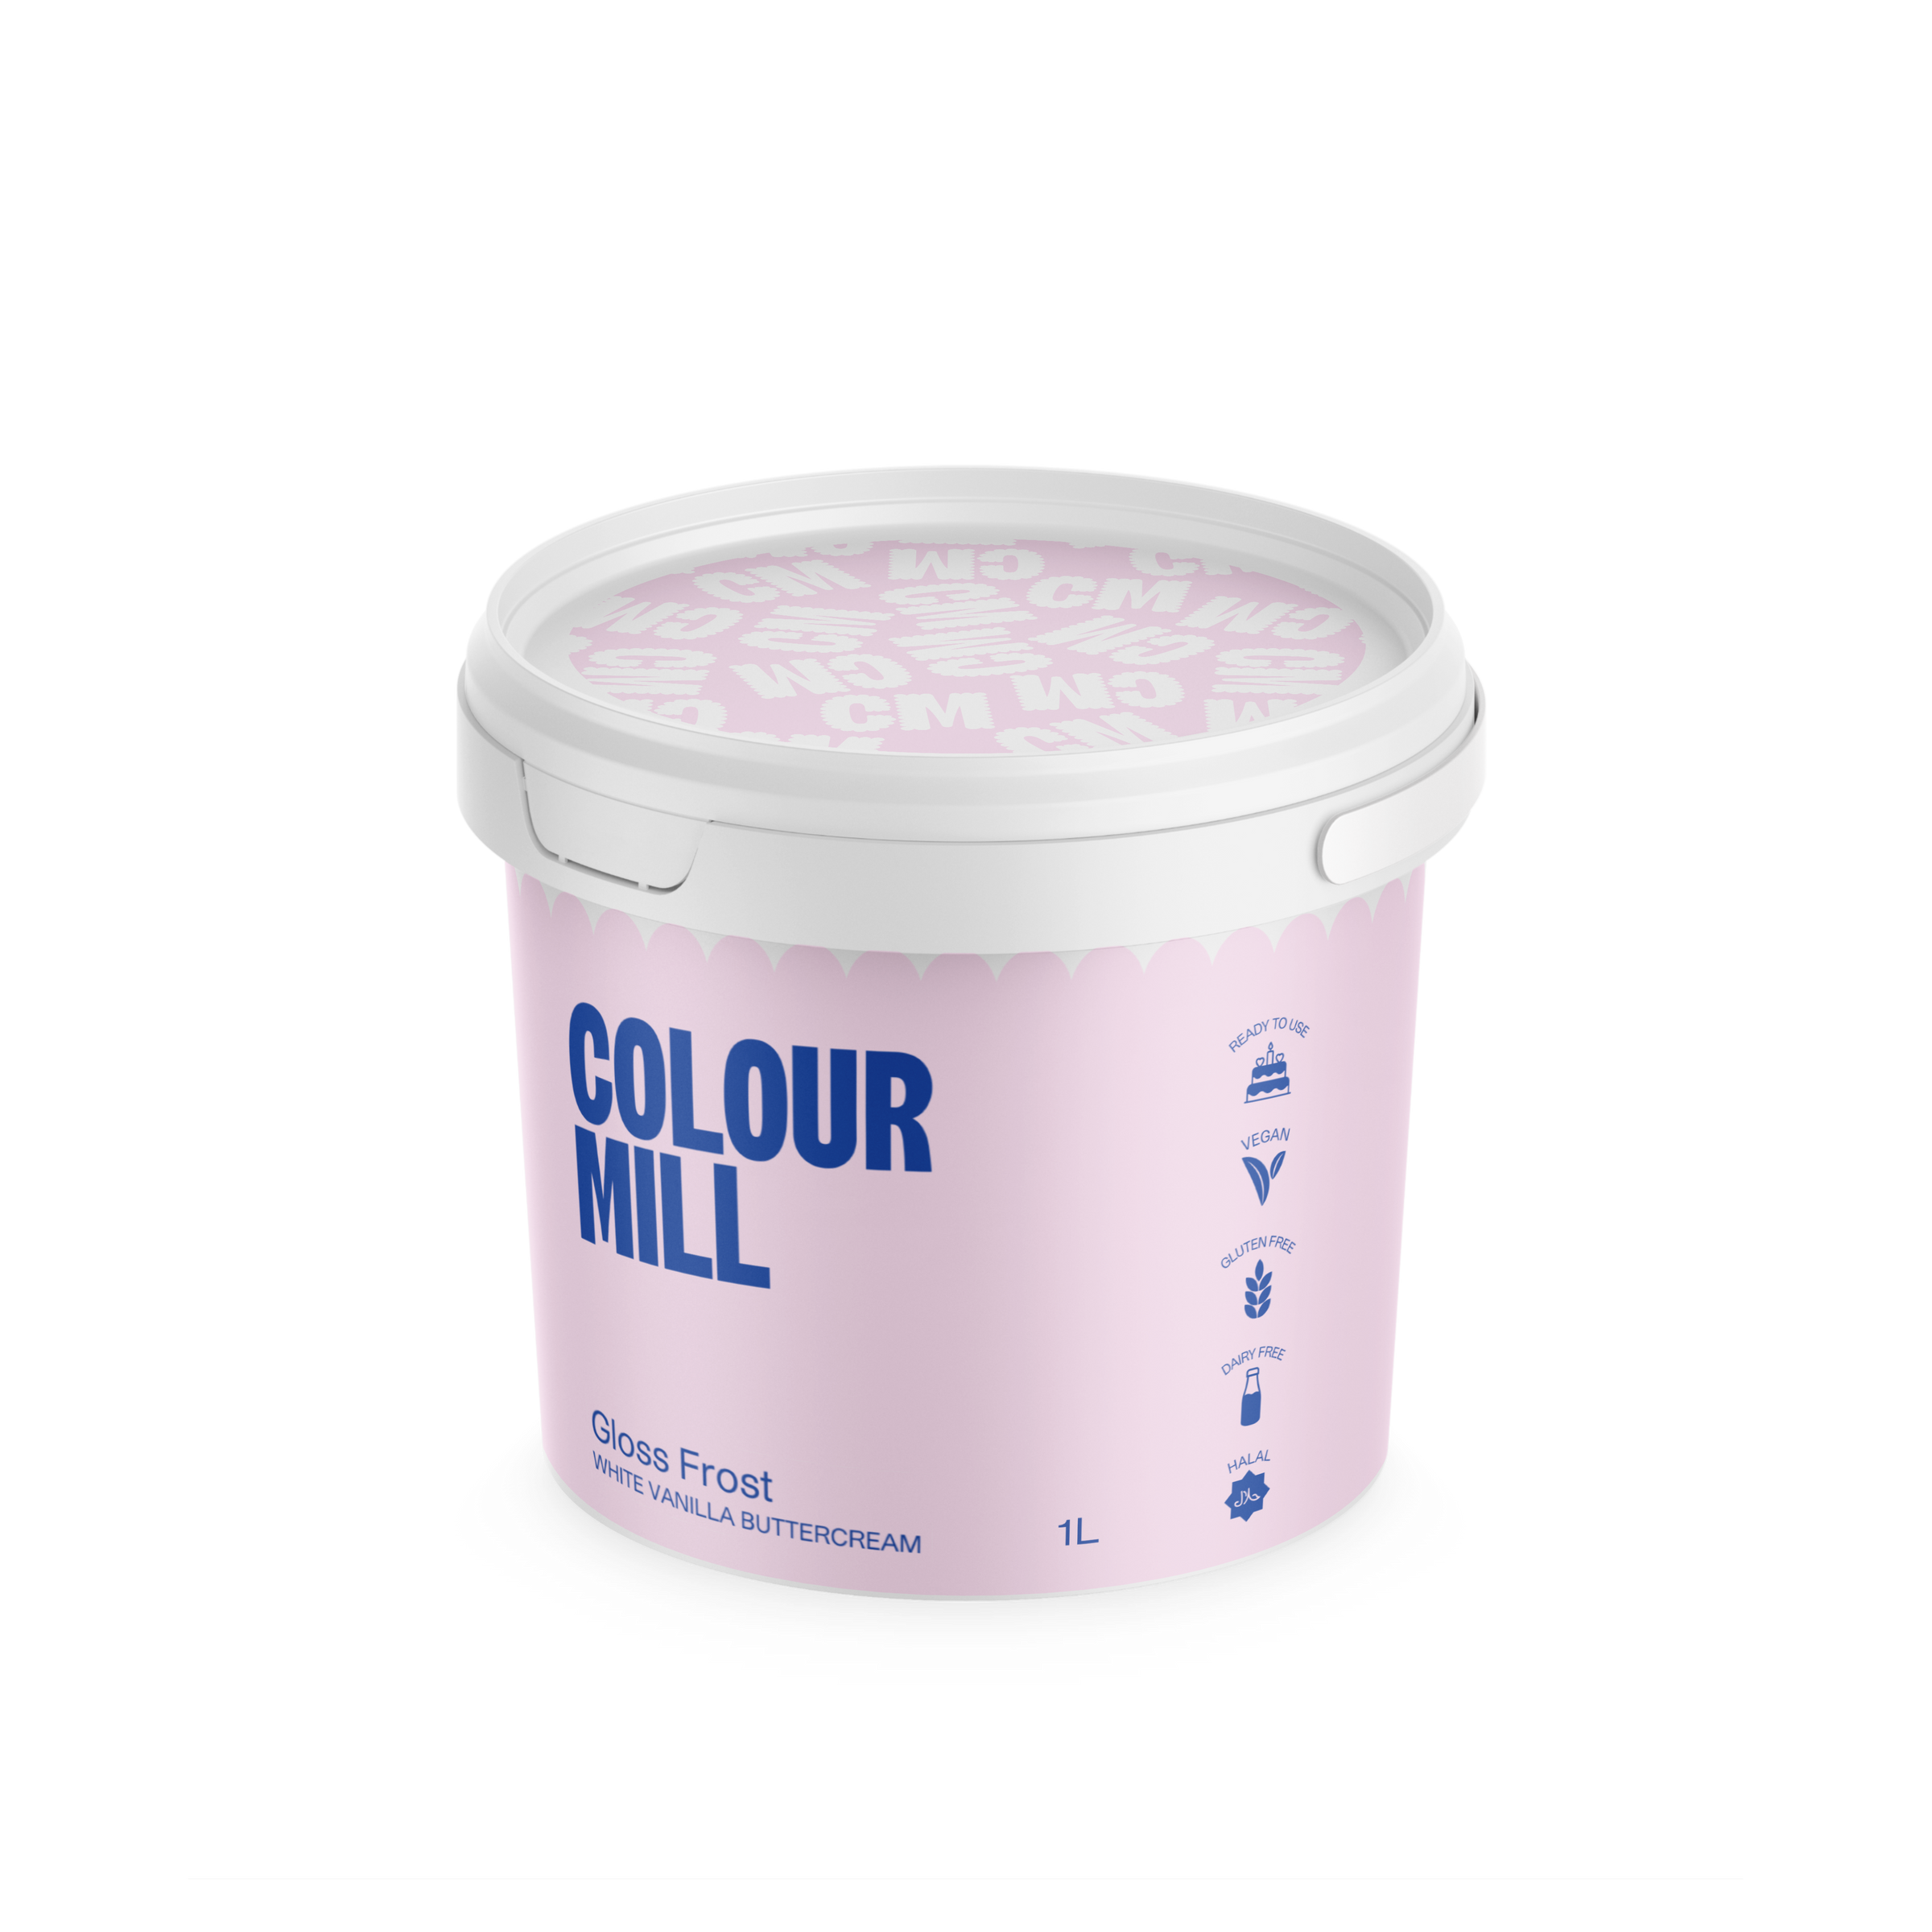 Colour Mill Gloss Frost Buttercream White 1L – Sweet Life Cake Supply